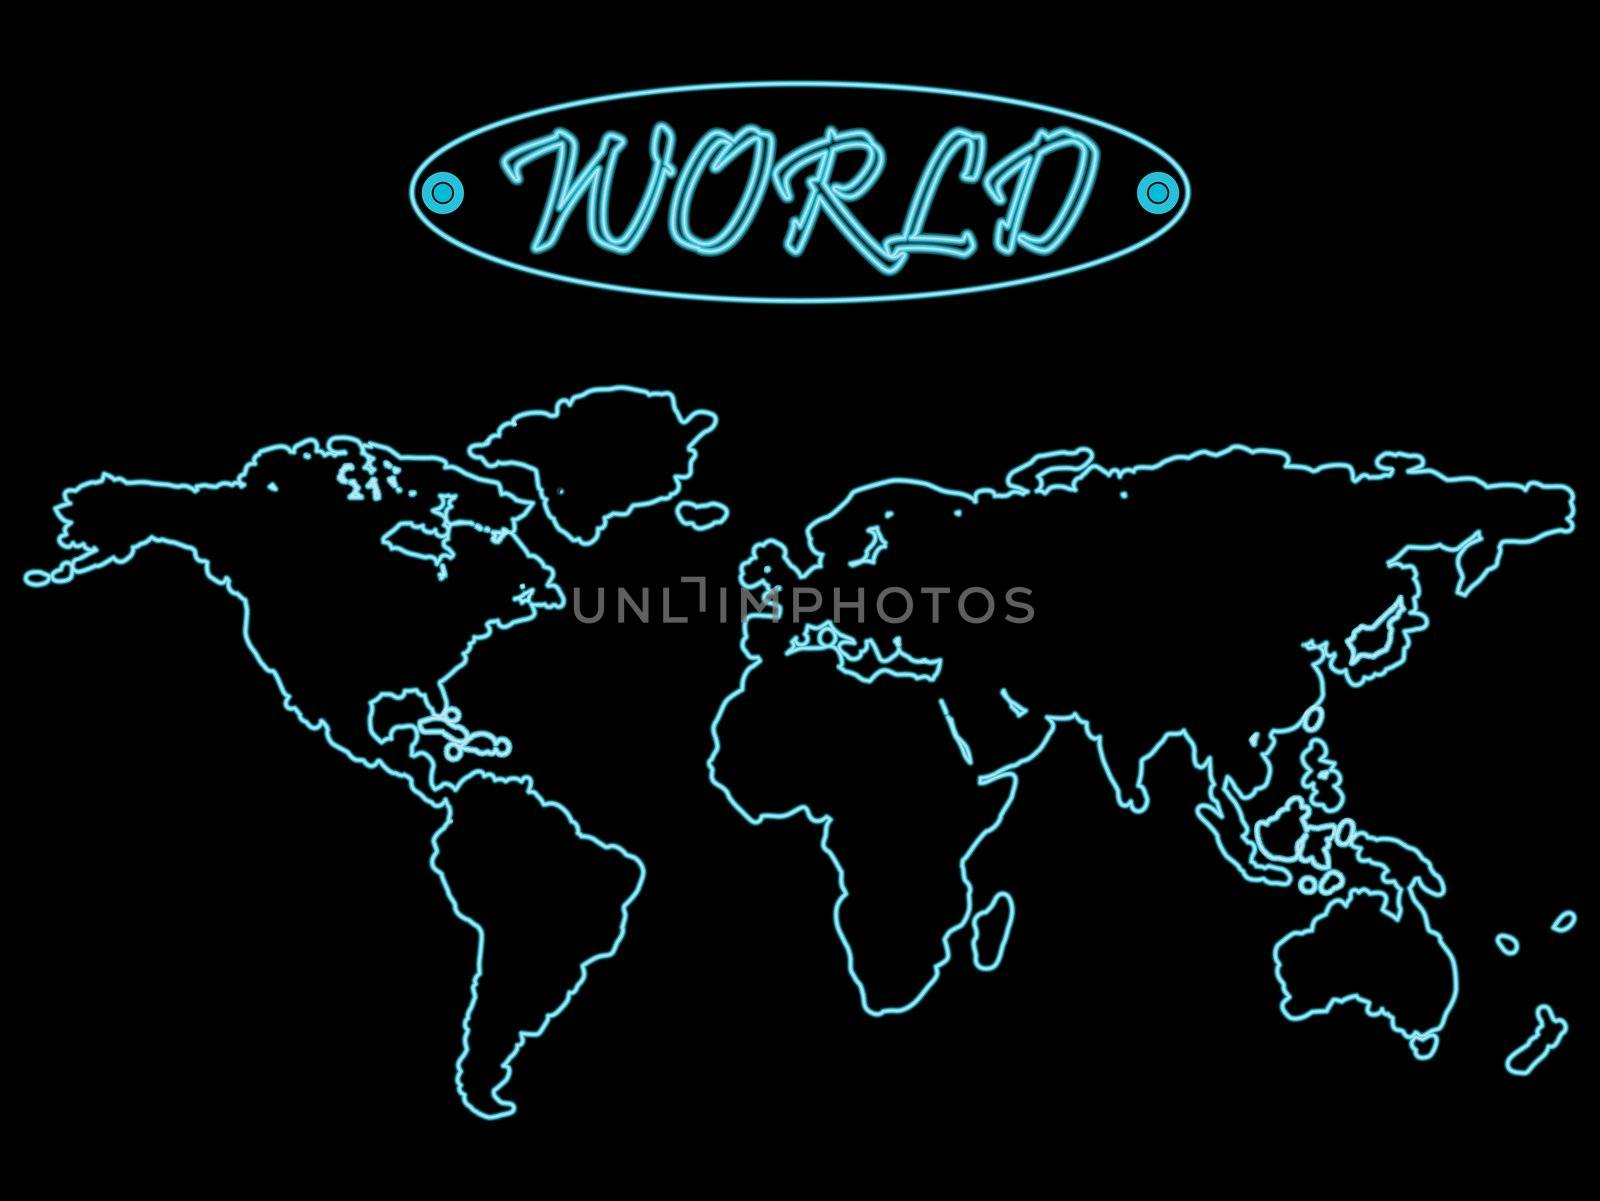 blue neon world map over black background, abstract vector art illustration